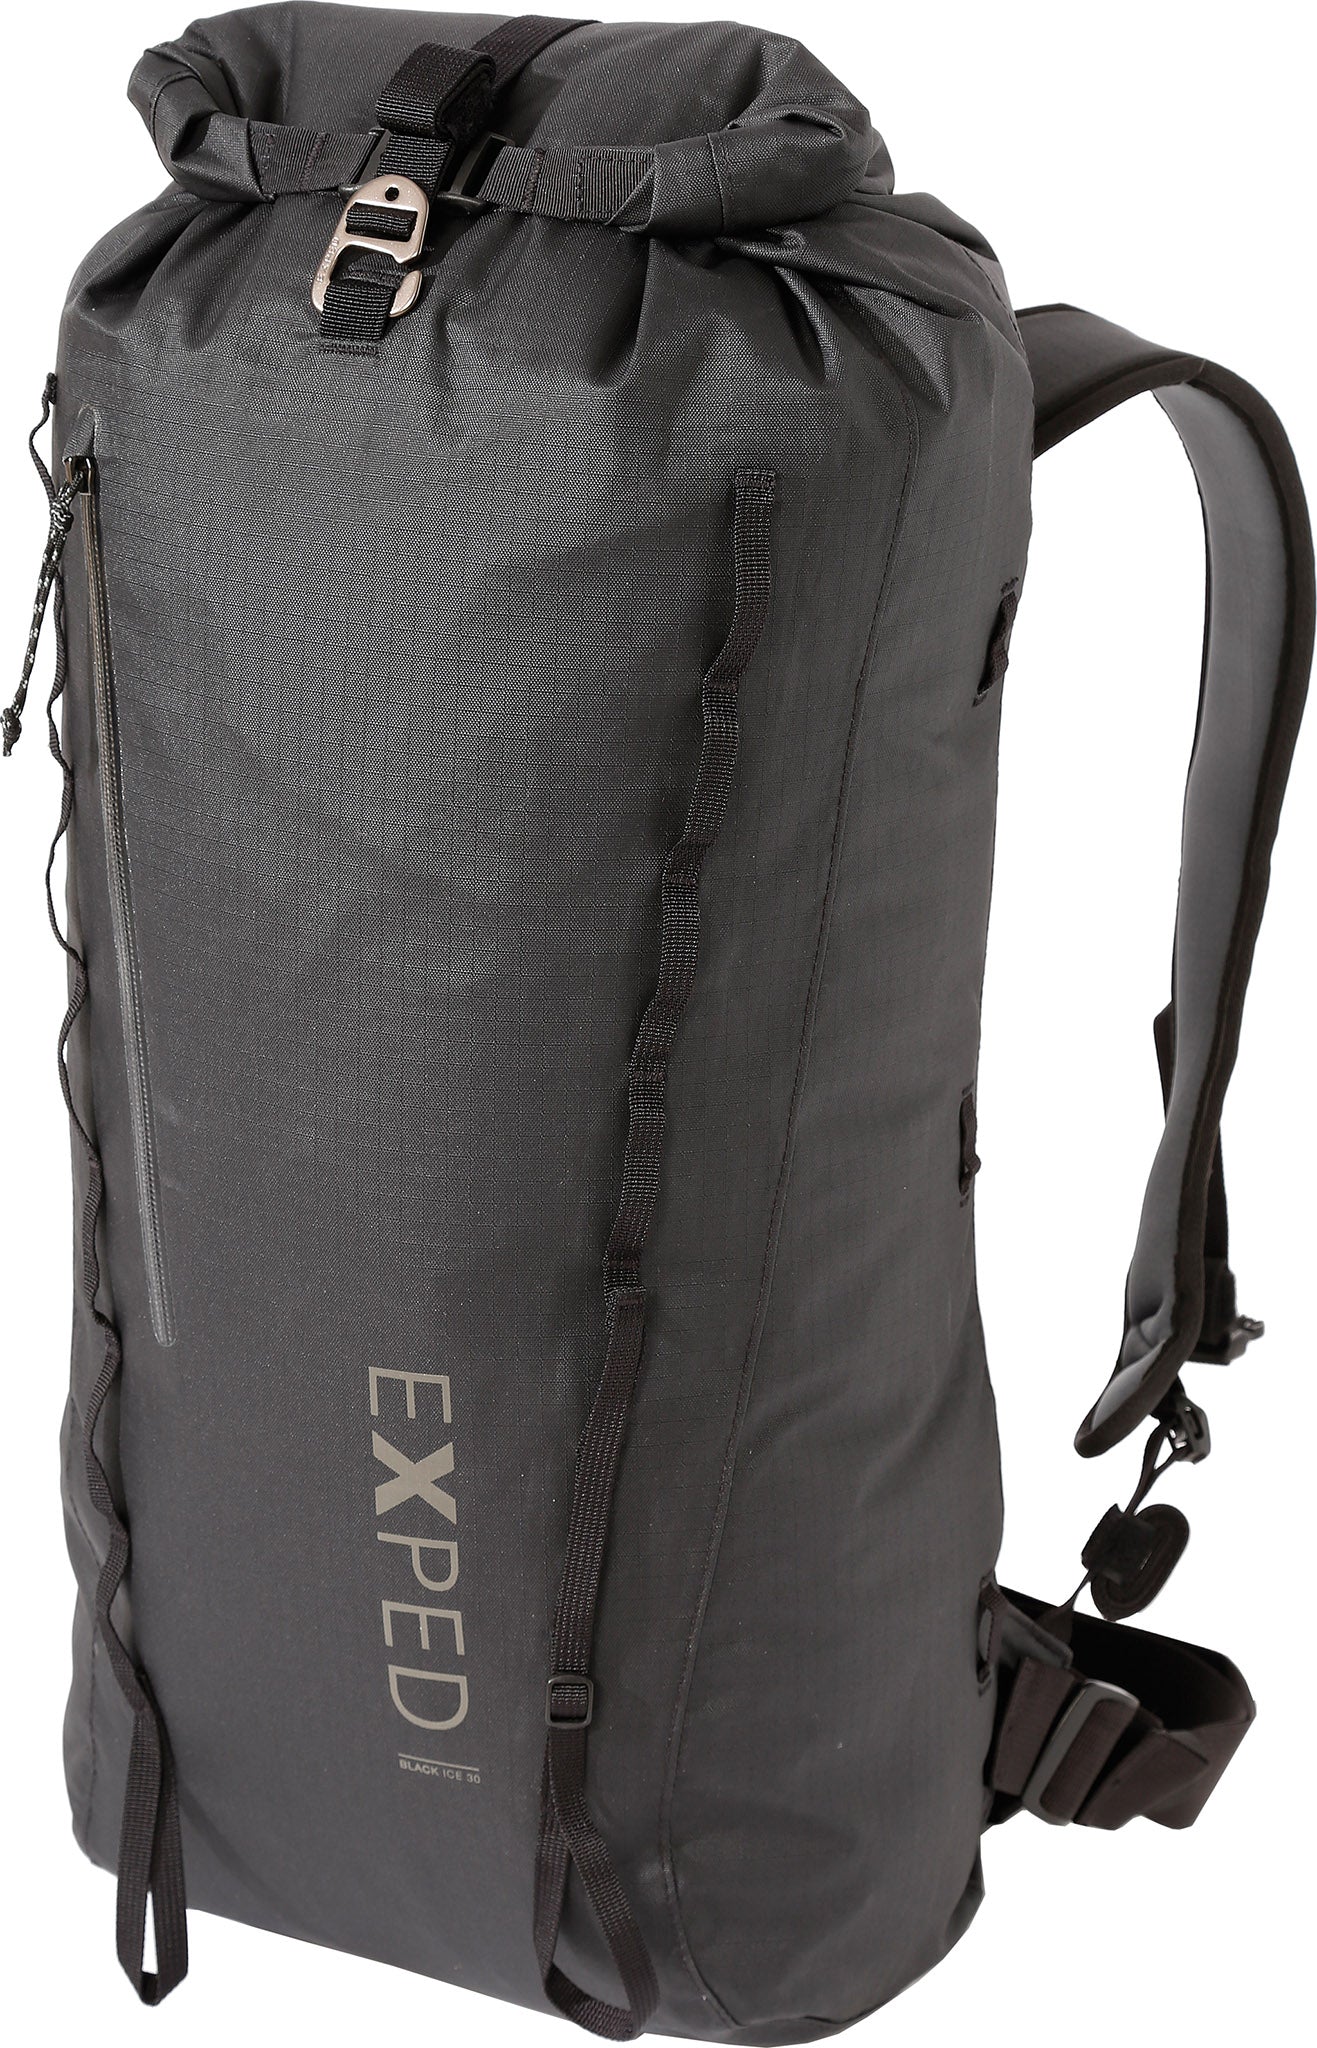 Exped Black Ice Backpack 30L - Unisex